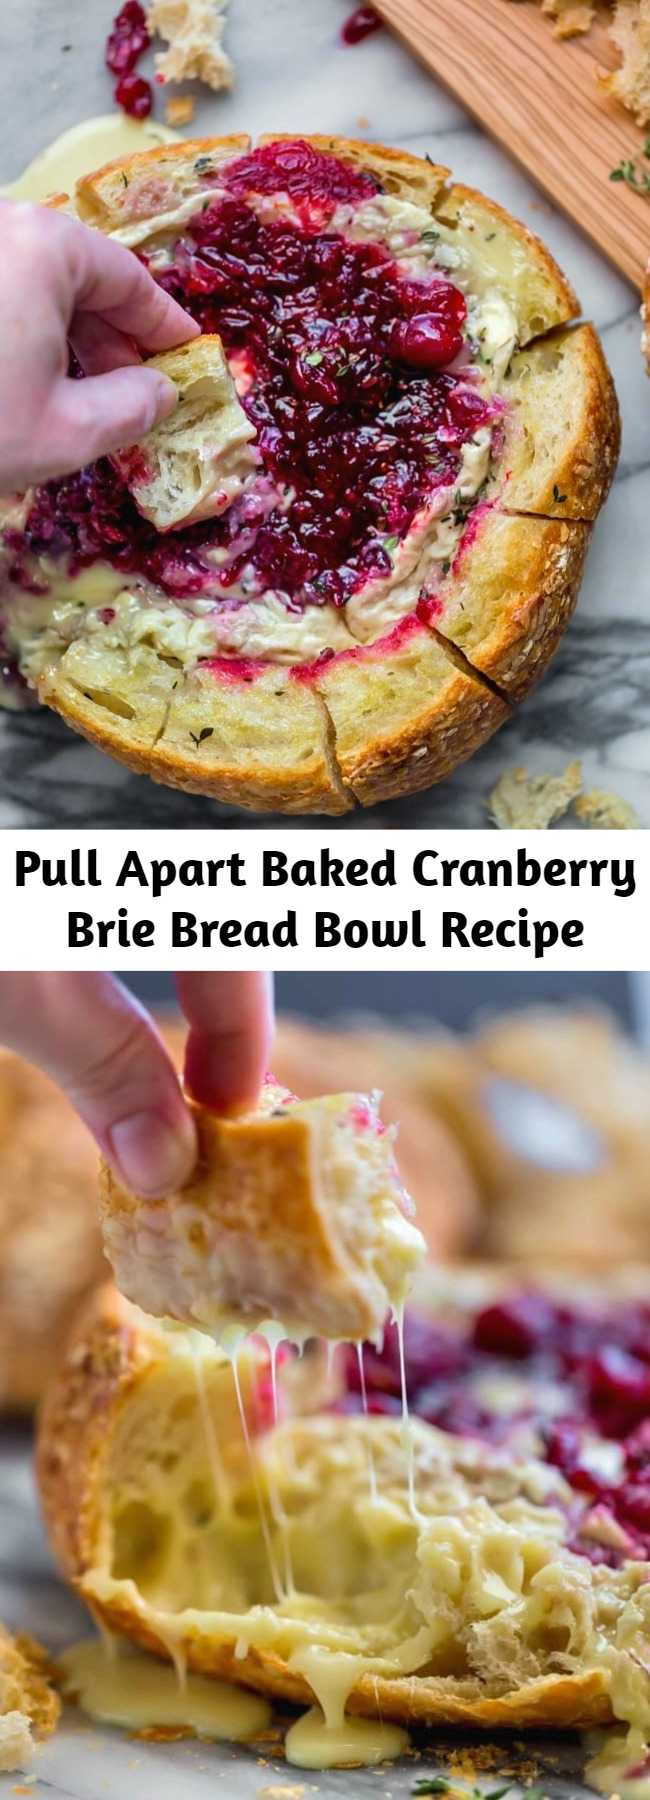 Pull Apart Baked Cranberry Brie Bread Bowl Recipe - This tear apart Baked Cranberry Brie Bread Bowl is a beautiful holiday party appetizer. Melty brie and sweet tart cranberry sauce are a match made in heaven! Great Appetizer for New Years Eve, or Christmas Dinner! #bakedbrie #breadbowl #appetizer #bread #thanksgiving #thanksgivingrecipes #holiday #holidayrecipe #cranberry #brie #recipe #easyrecipe #christmasrecipe #newyearsrecipe